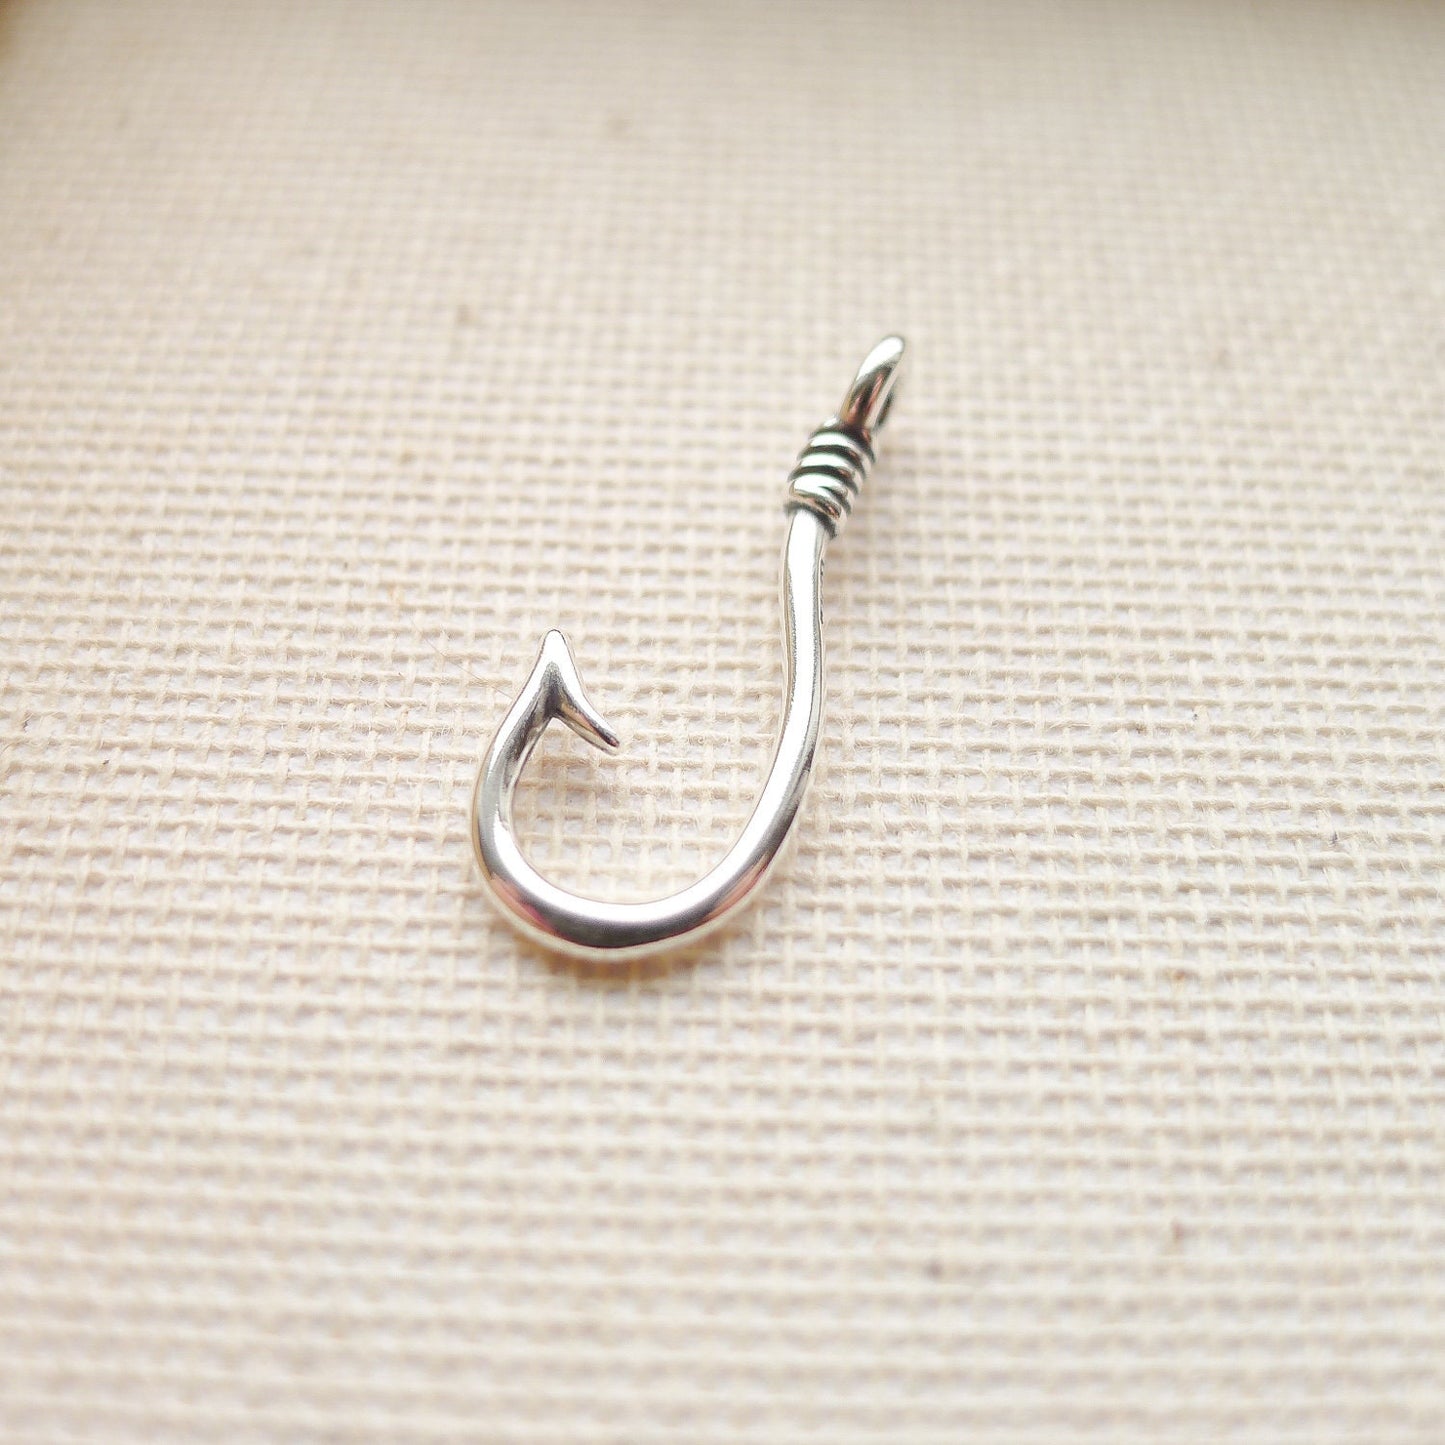 Fish Hook Charm Sterling Silver Fishing Component or Link for Jewelry Making